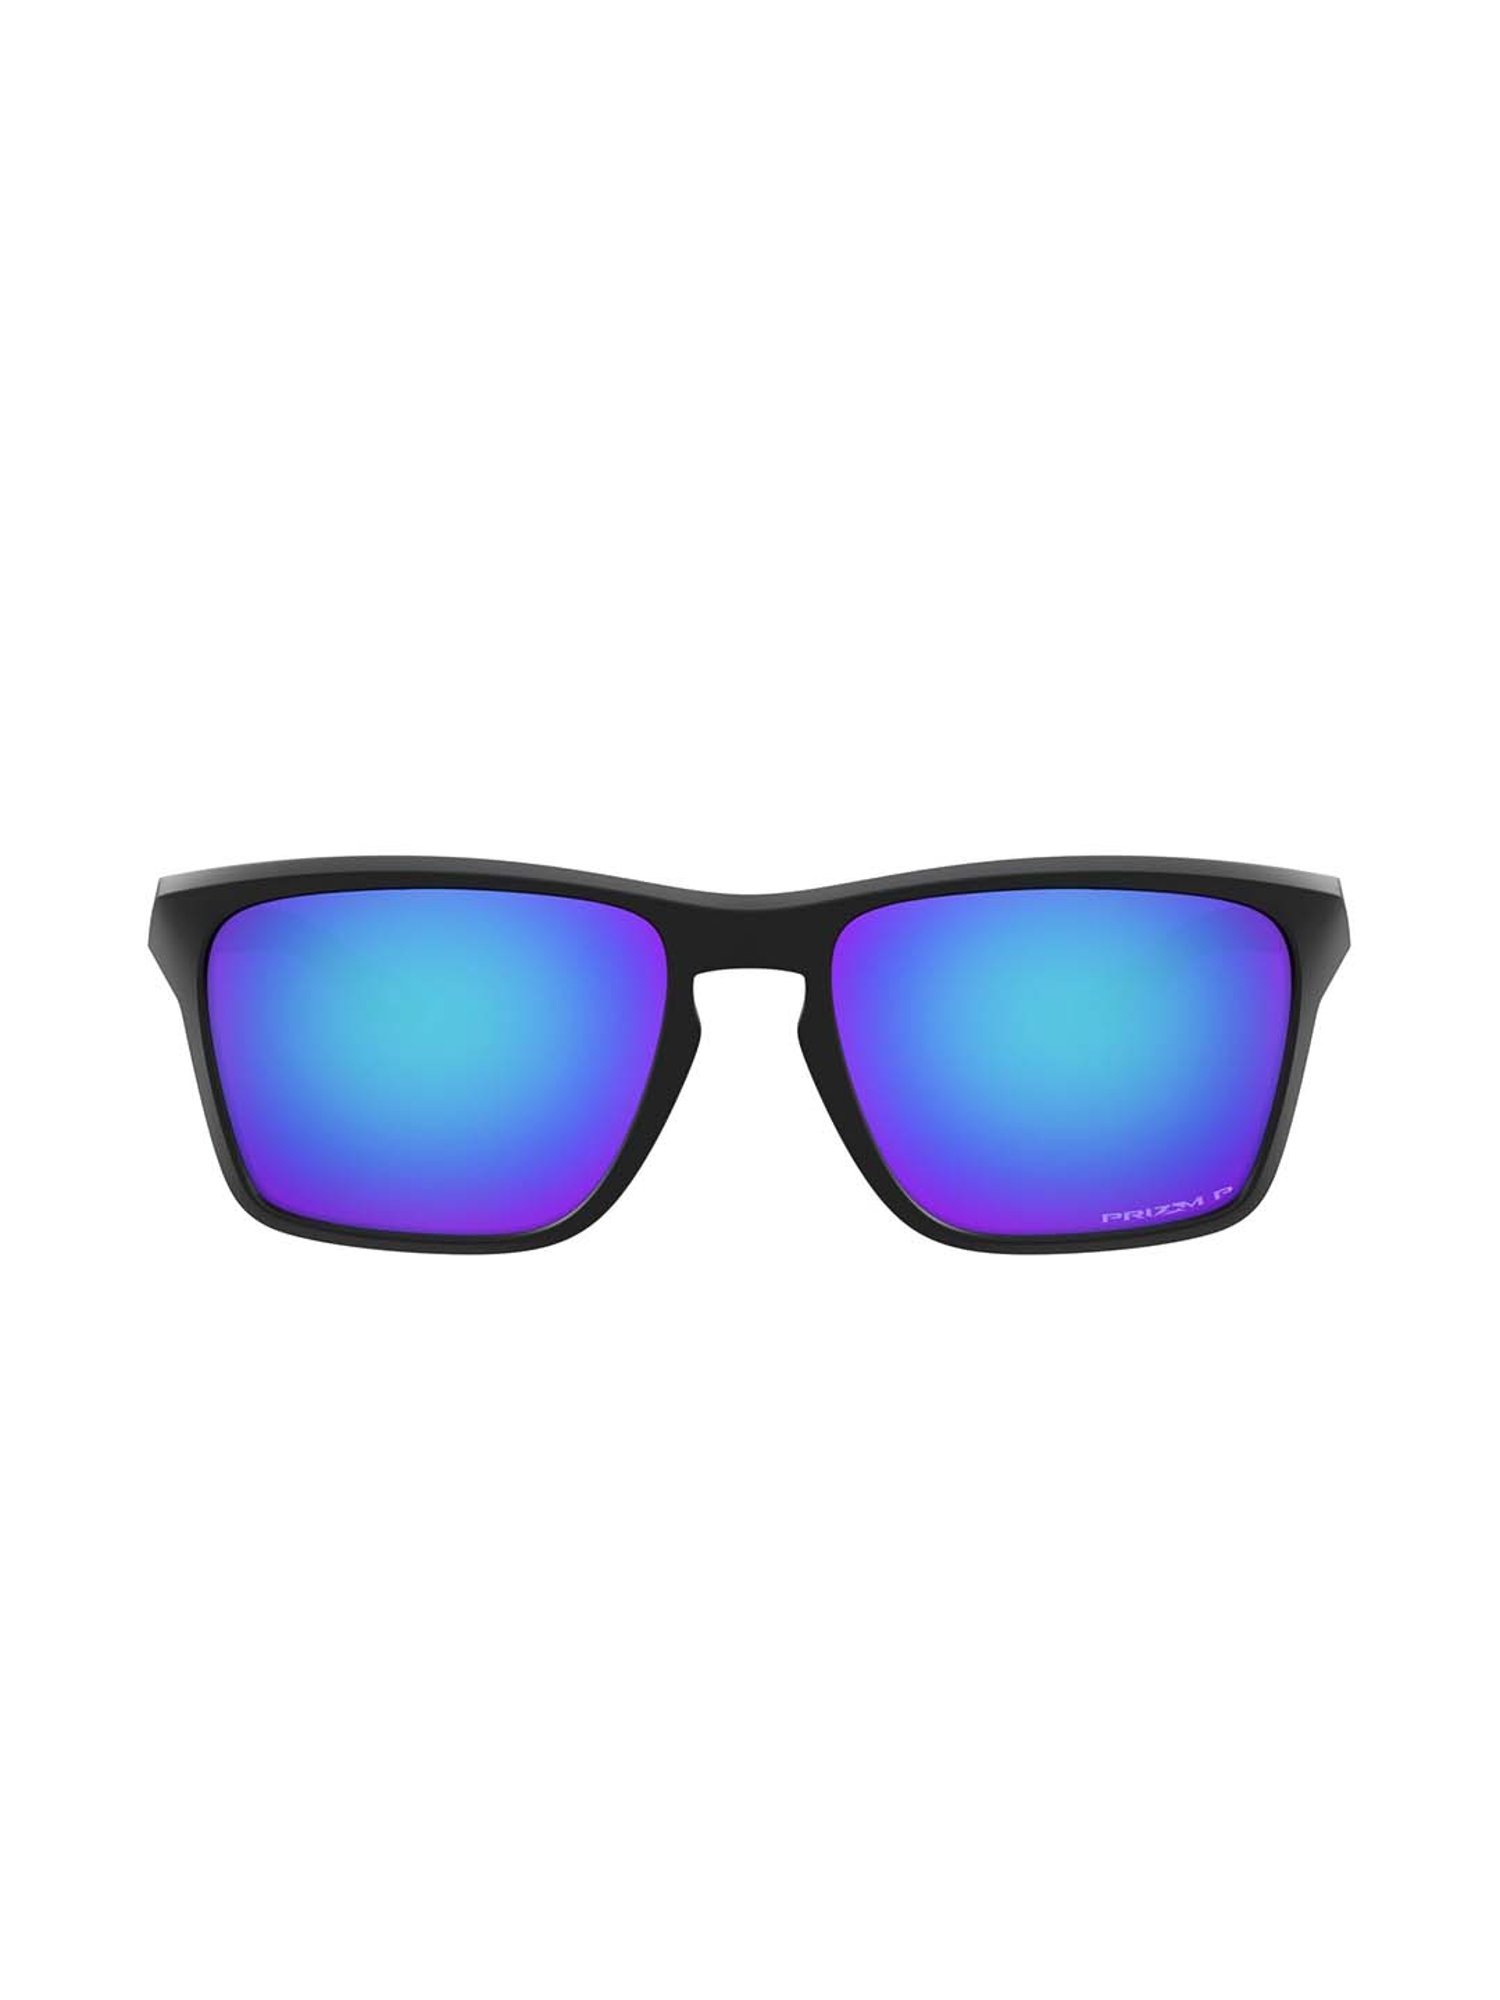 Buy Oakley 0OO9448 Blue Prizm Sylas Square Sunglasses - 57 mm For 